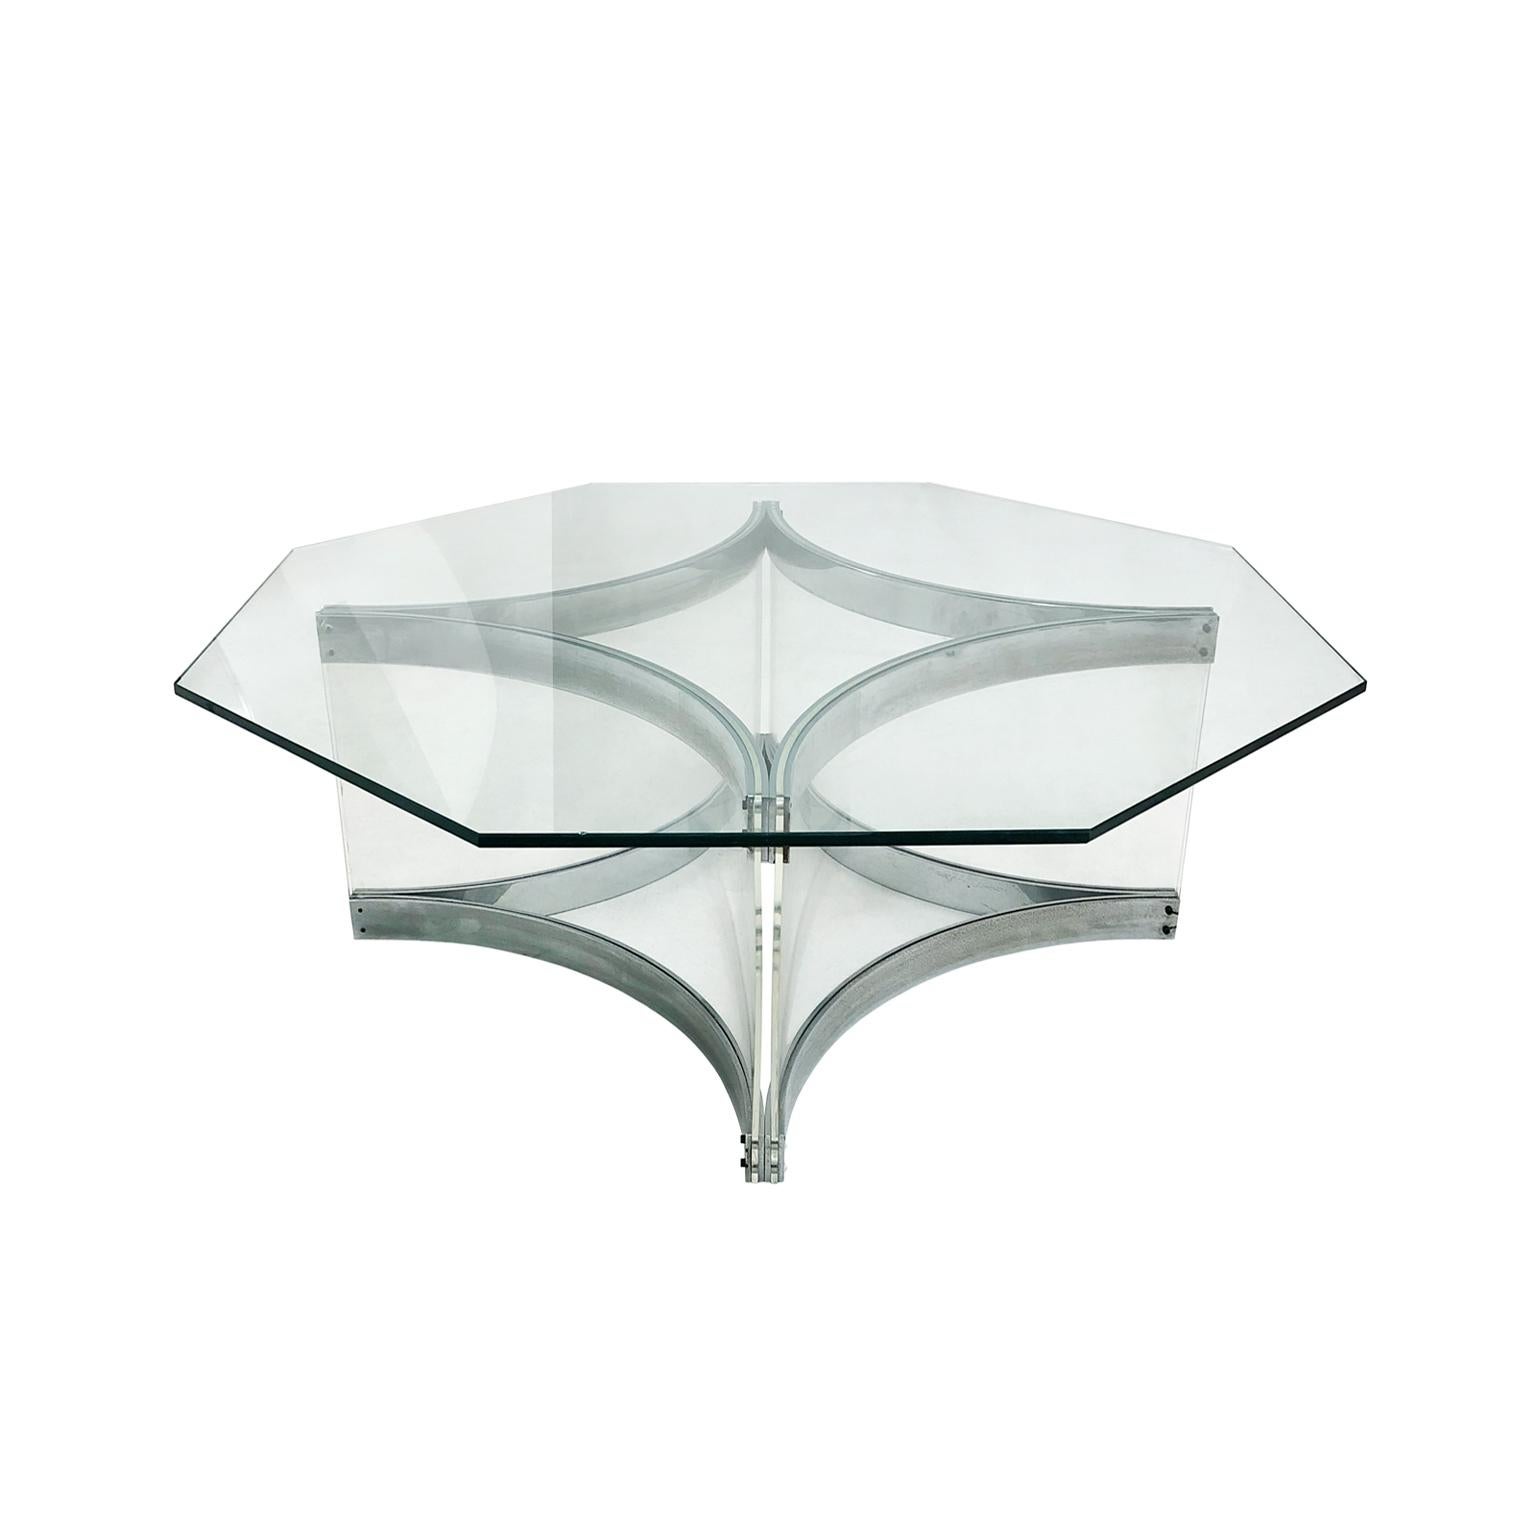 Lucite and chrome coffee table with octagonal glass top by Alessandro Albrizzi. Italy, 1970s.